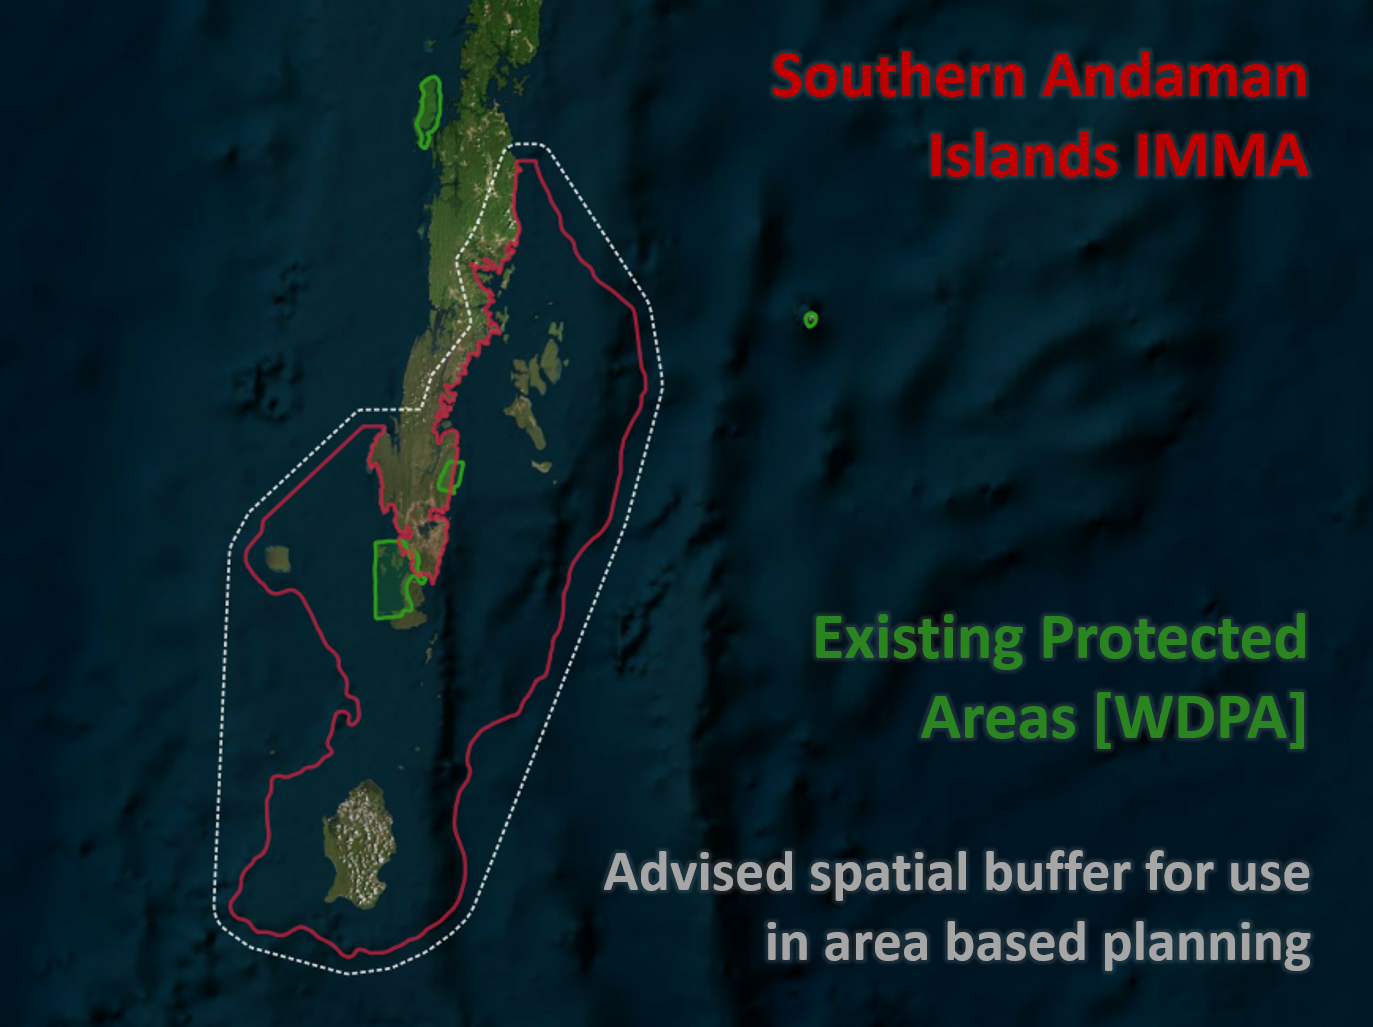 Implementing IMMAs in the Andaman Sea